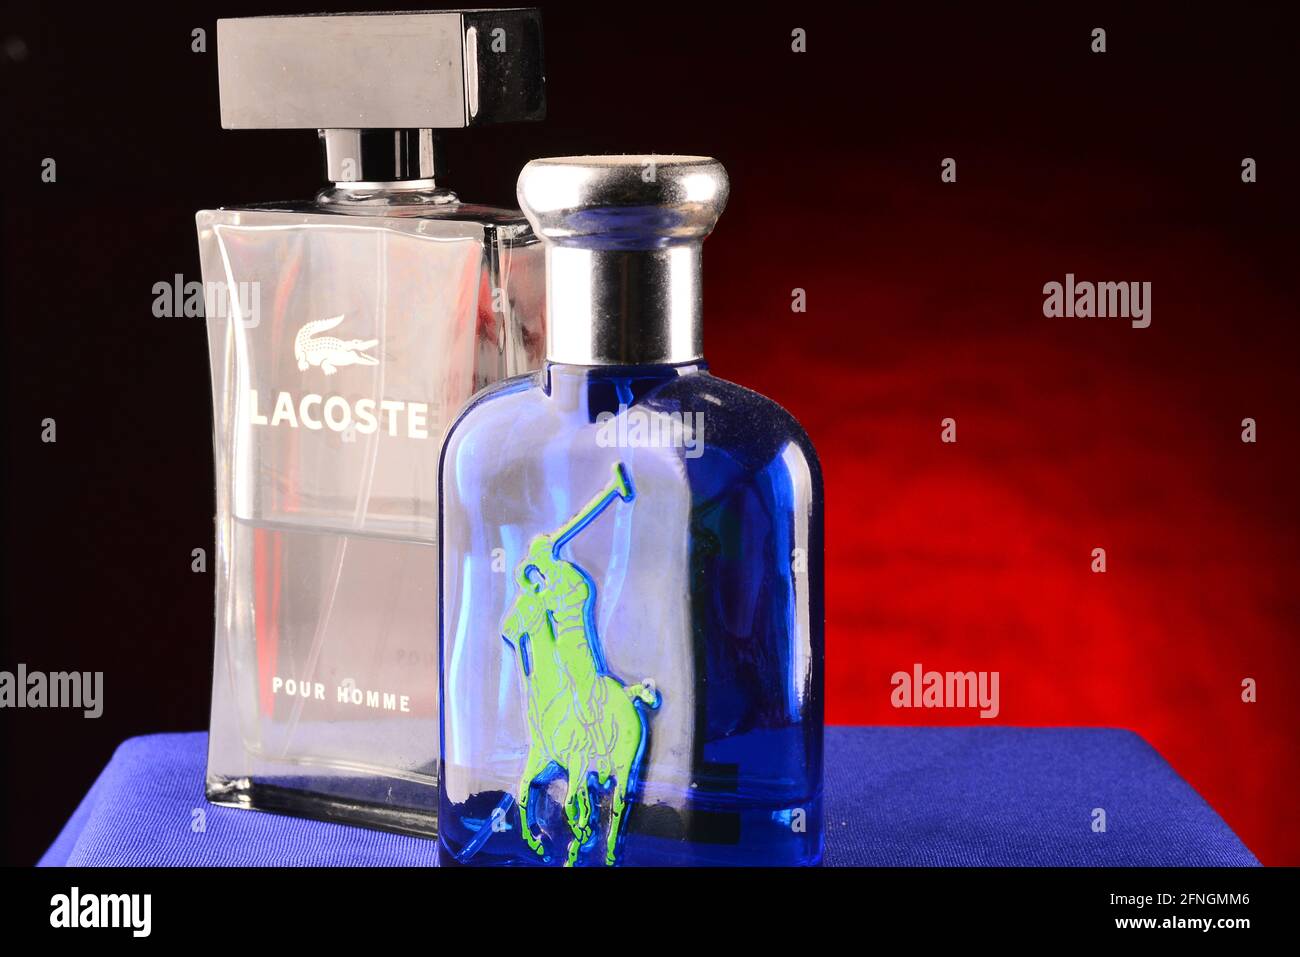 Lacoste and Polo parfum Stock Photo